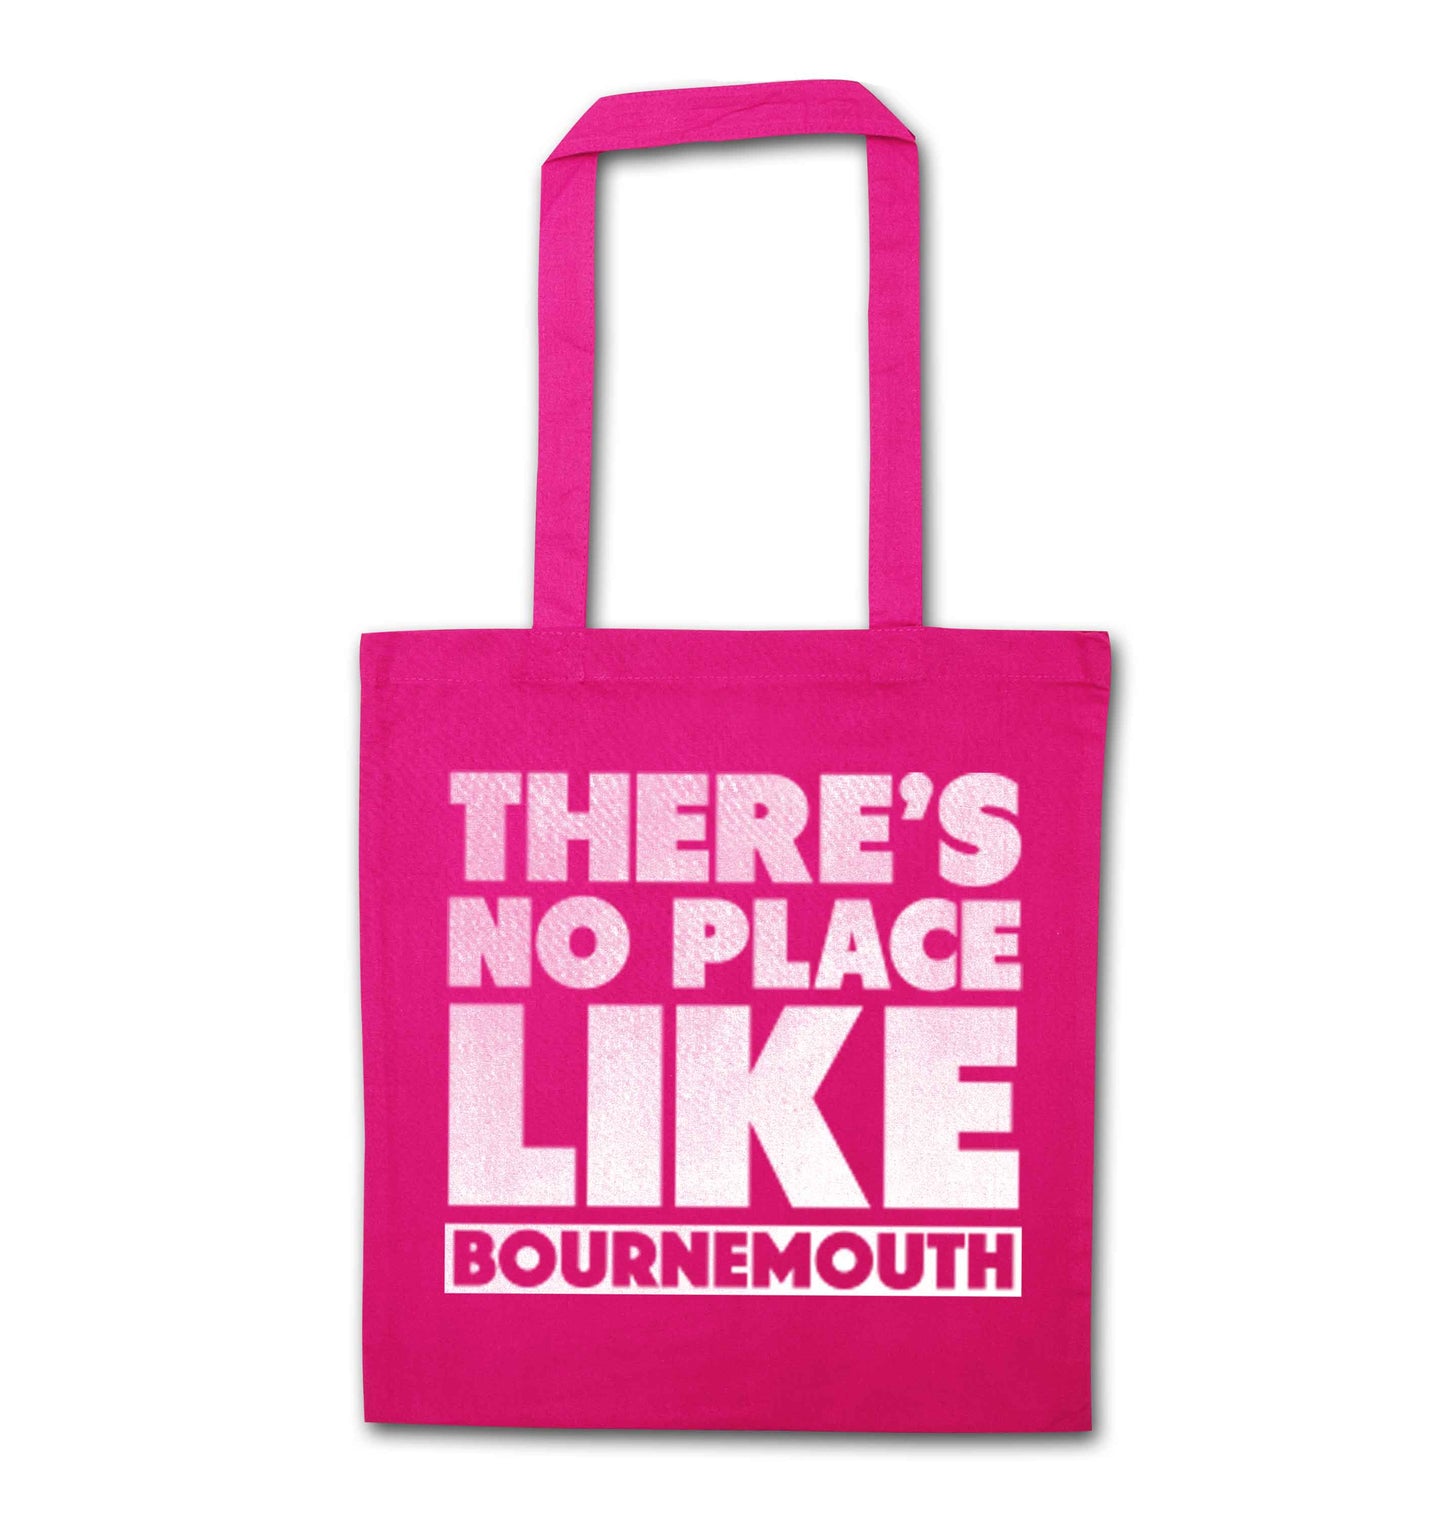 There's no place like Bournemouth pink tote bag